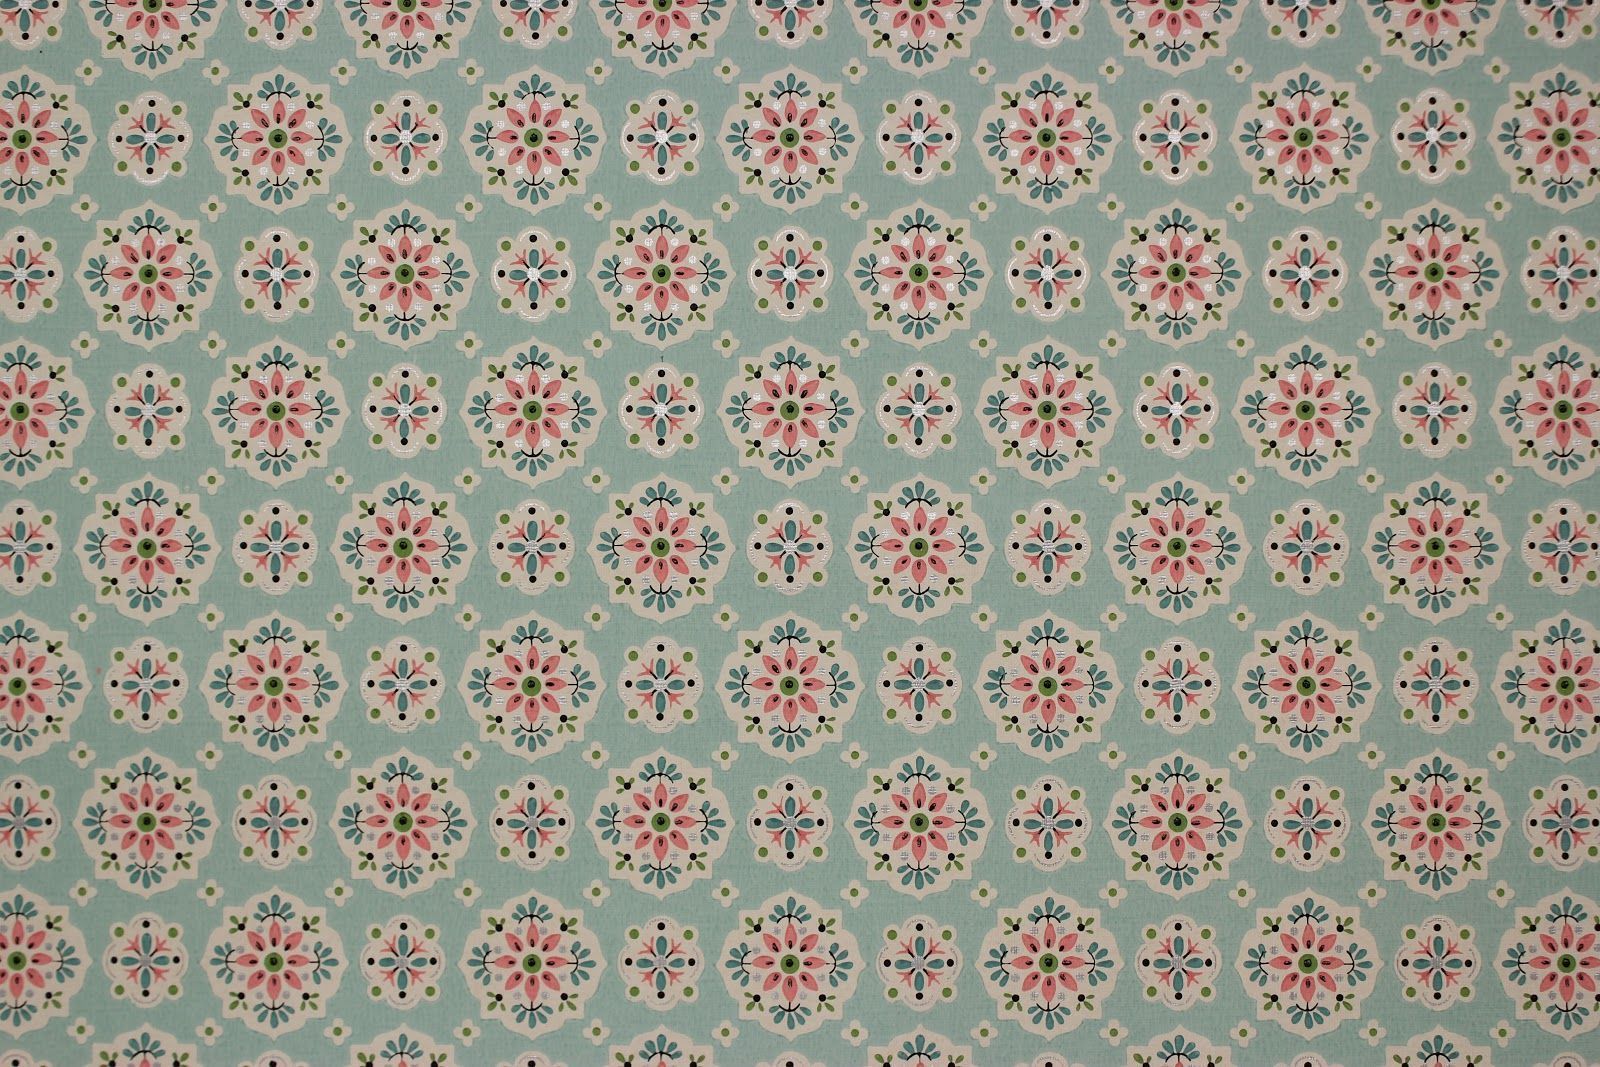 Floral Wallpaper Tumblr Quotes for Iphonr Pattern Vintage Hd ...